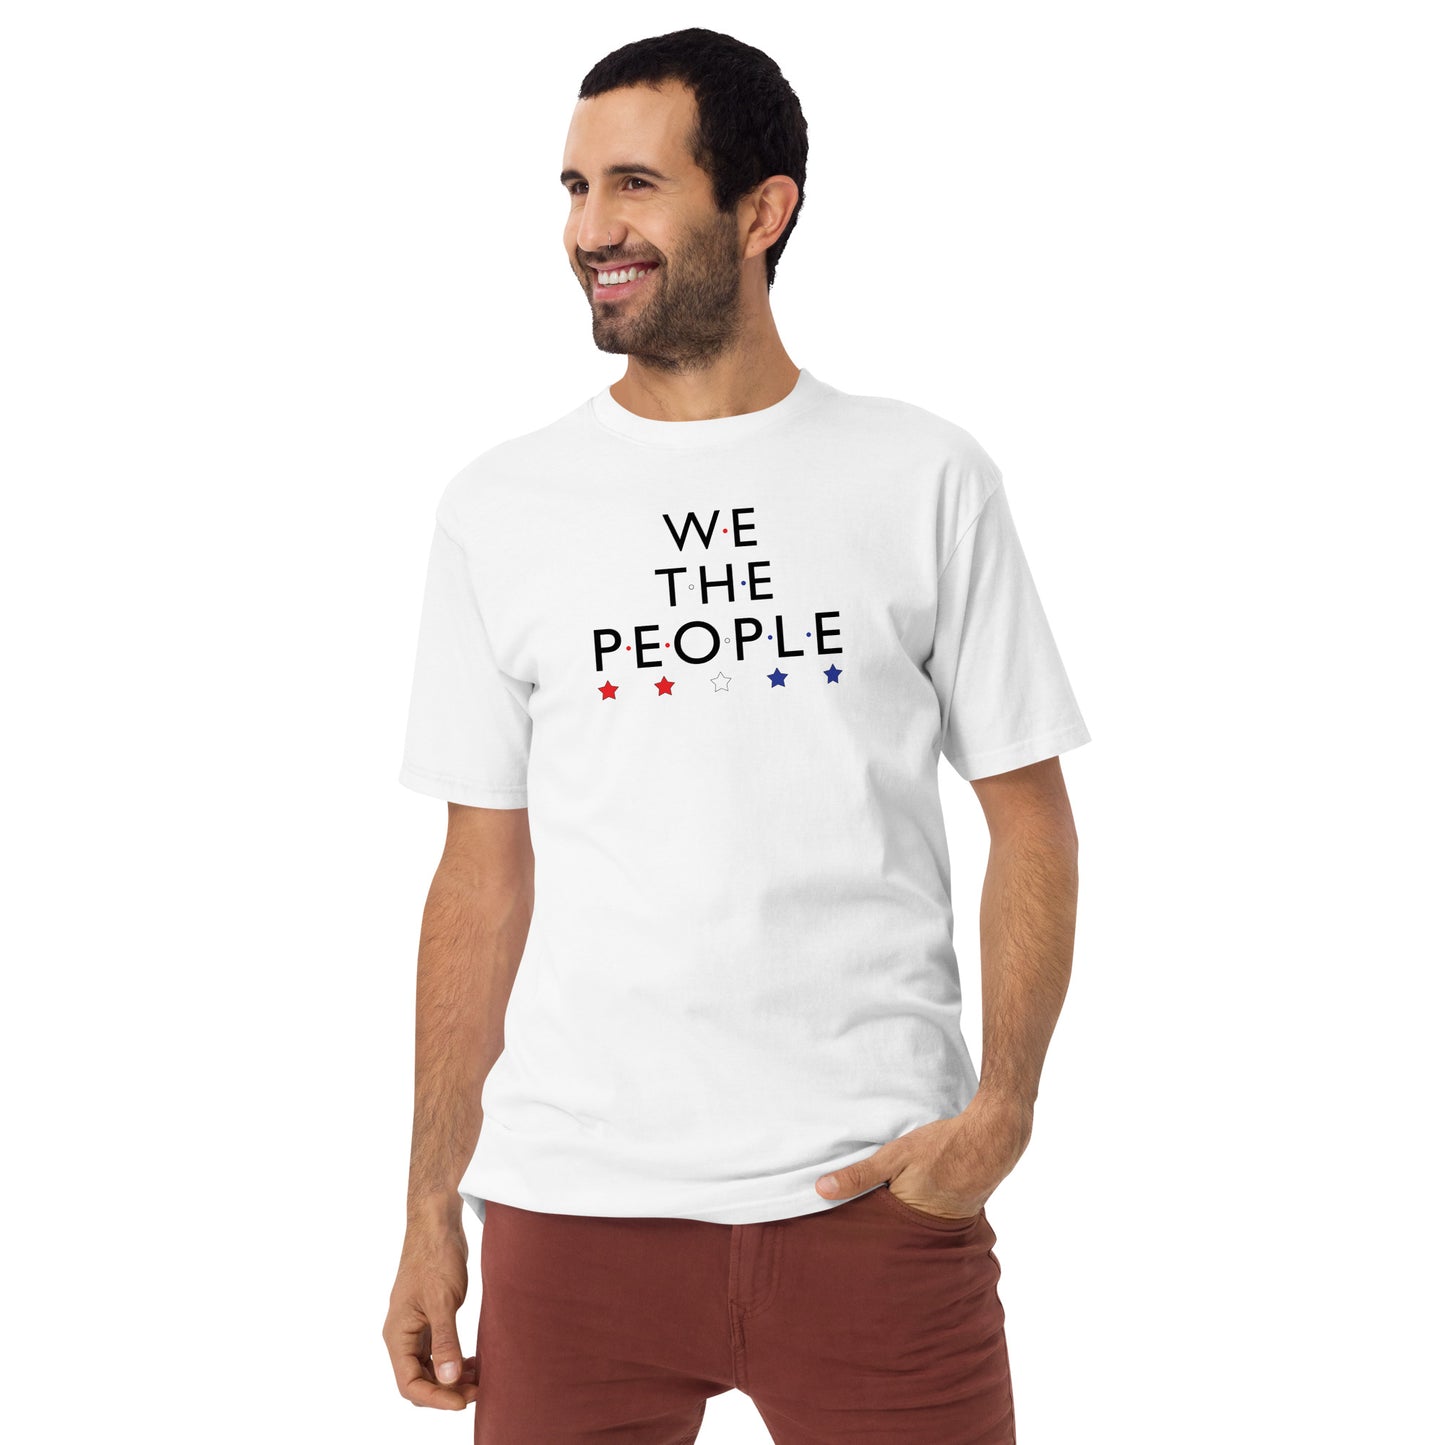 We The People White tee